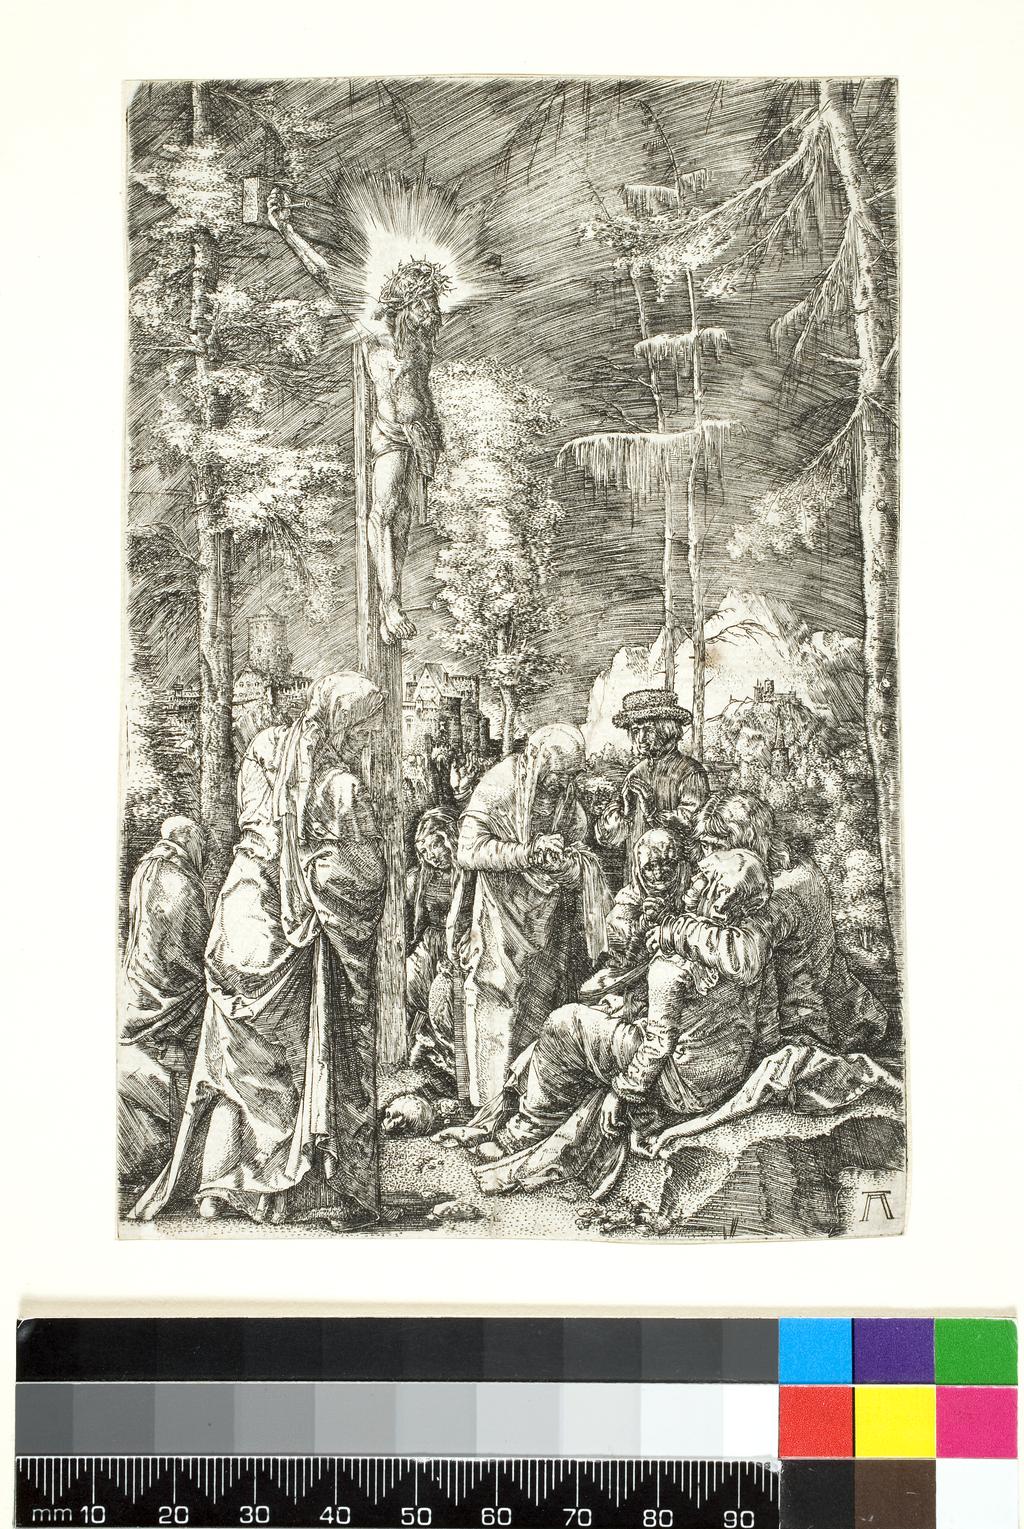 An image of Albrecht AltdorferChrist on the cross (The large crucifixion)c.1515-17Engraving, 144 x 97 mm